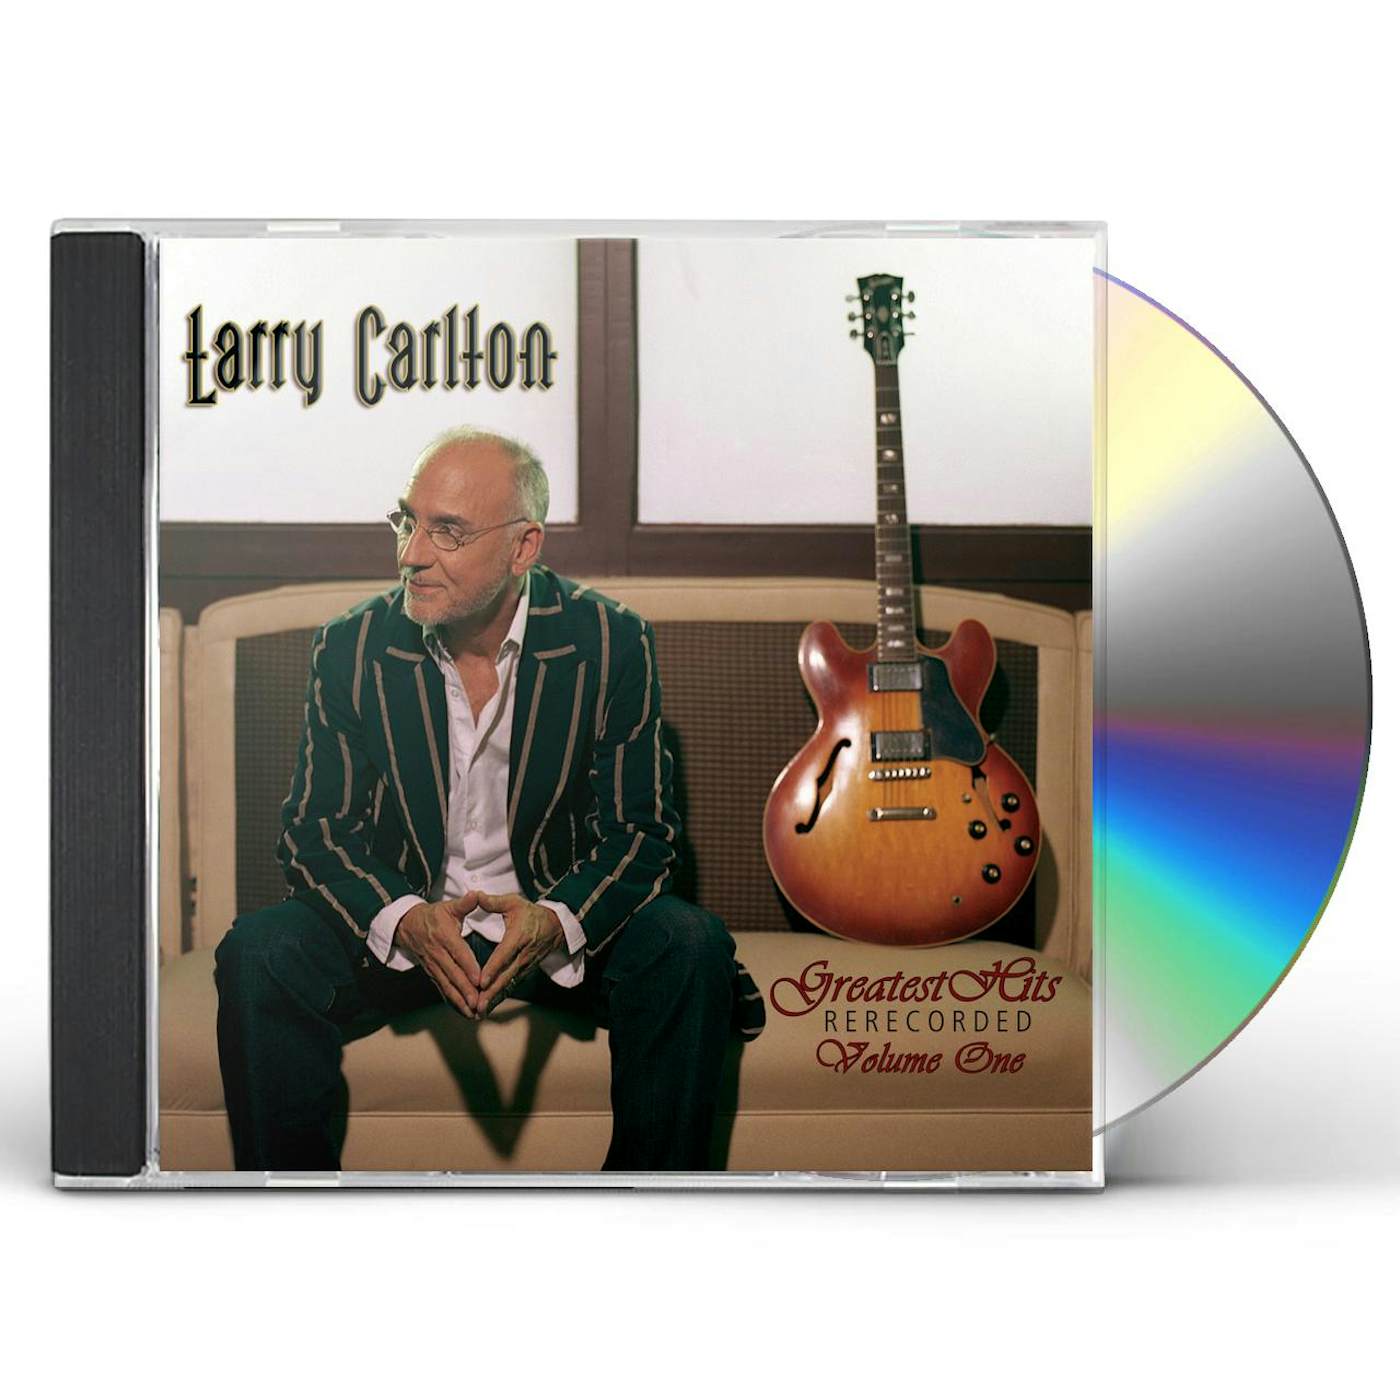 Larry Carlton GREATEST HITS RE-RECORDED 1 CD